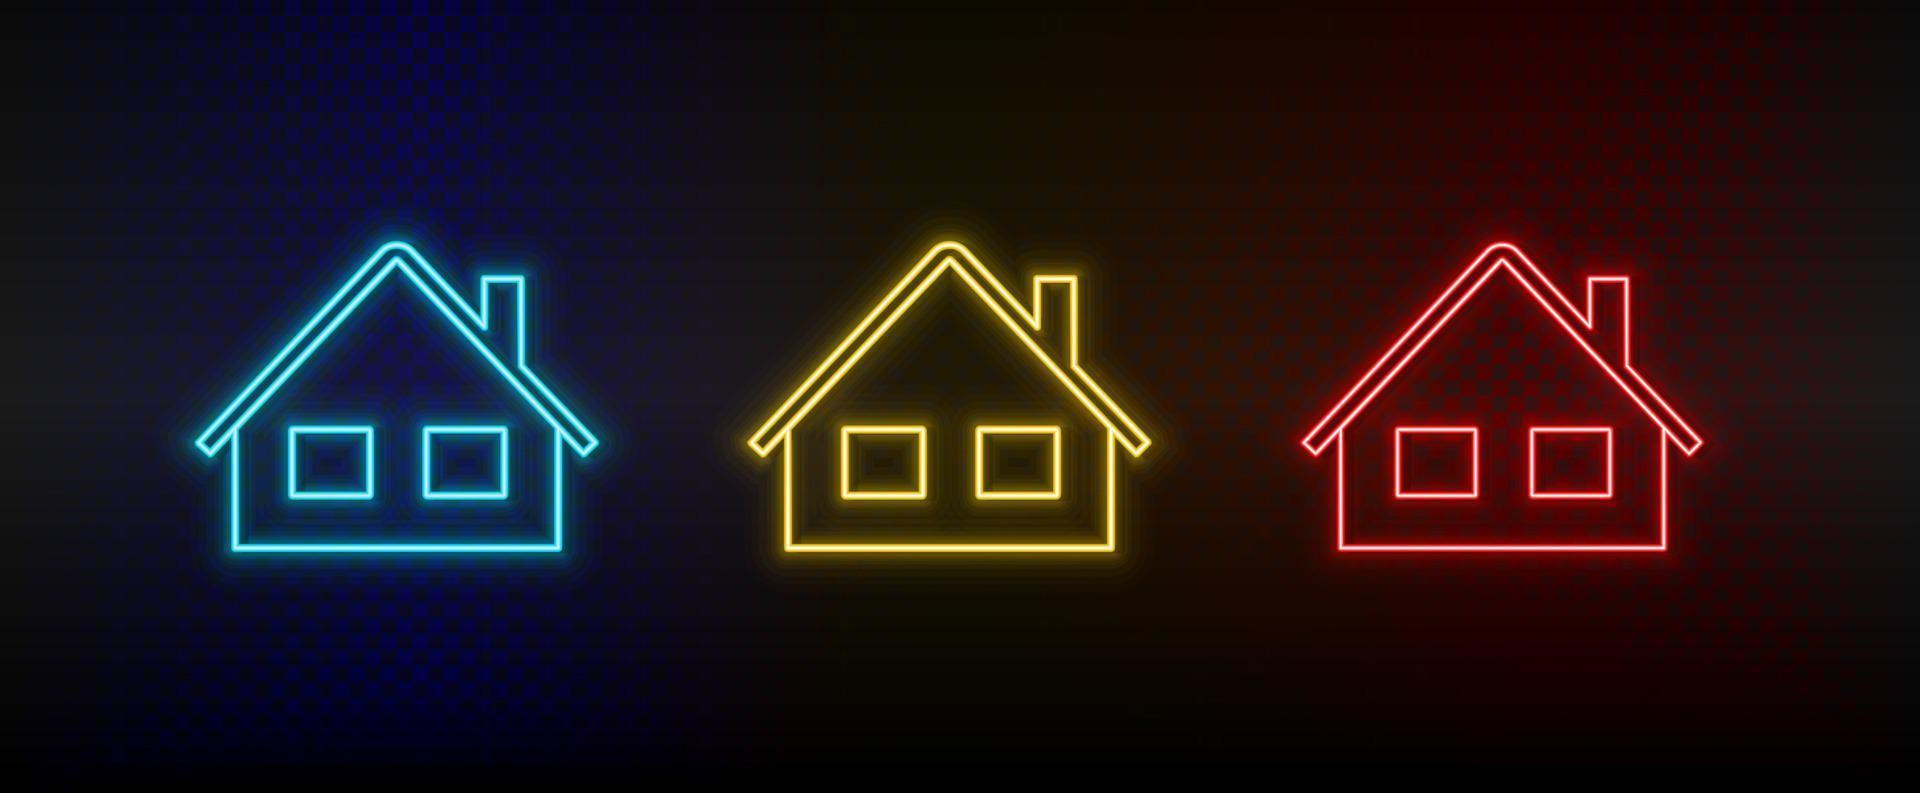 Neon icons. Building. Set of red, blue, yellow neon vector icon on dark background